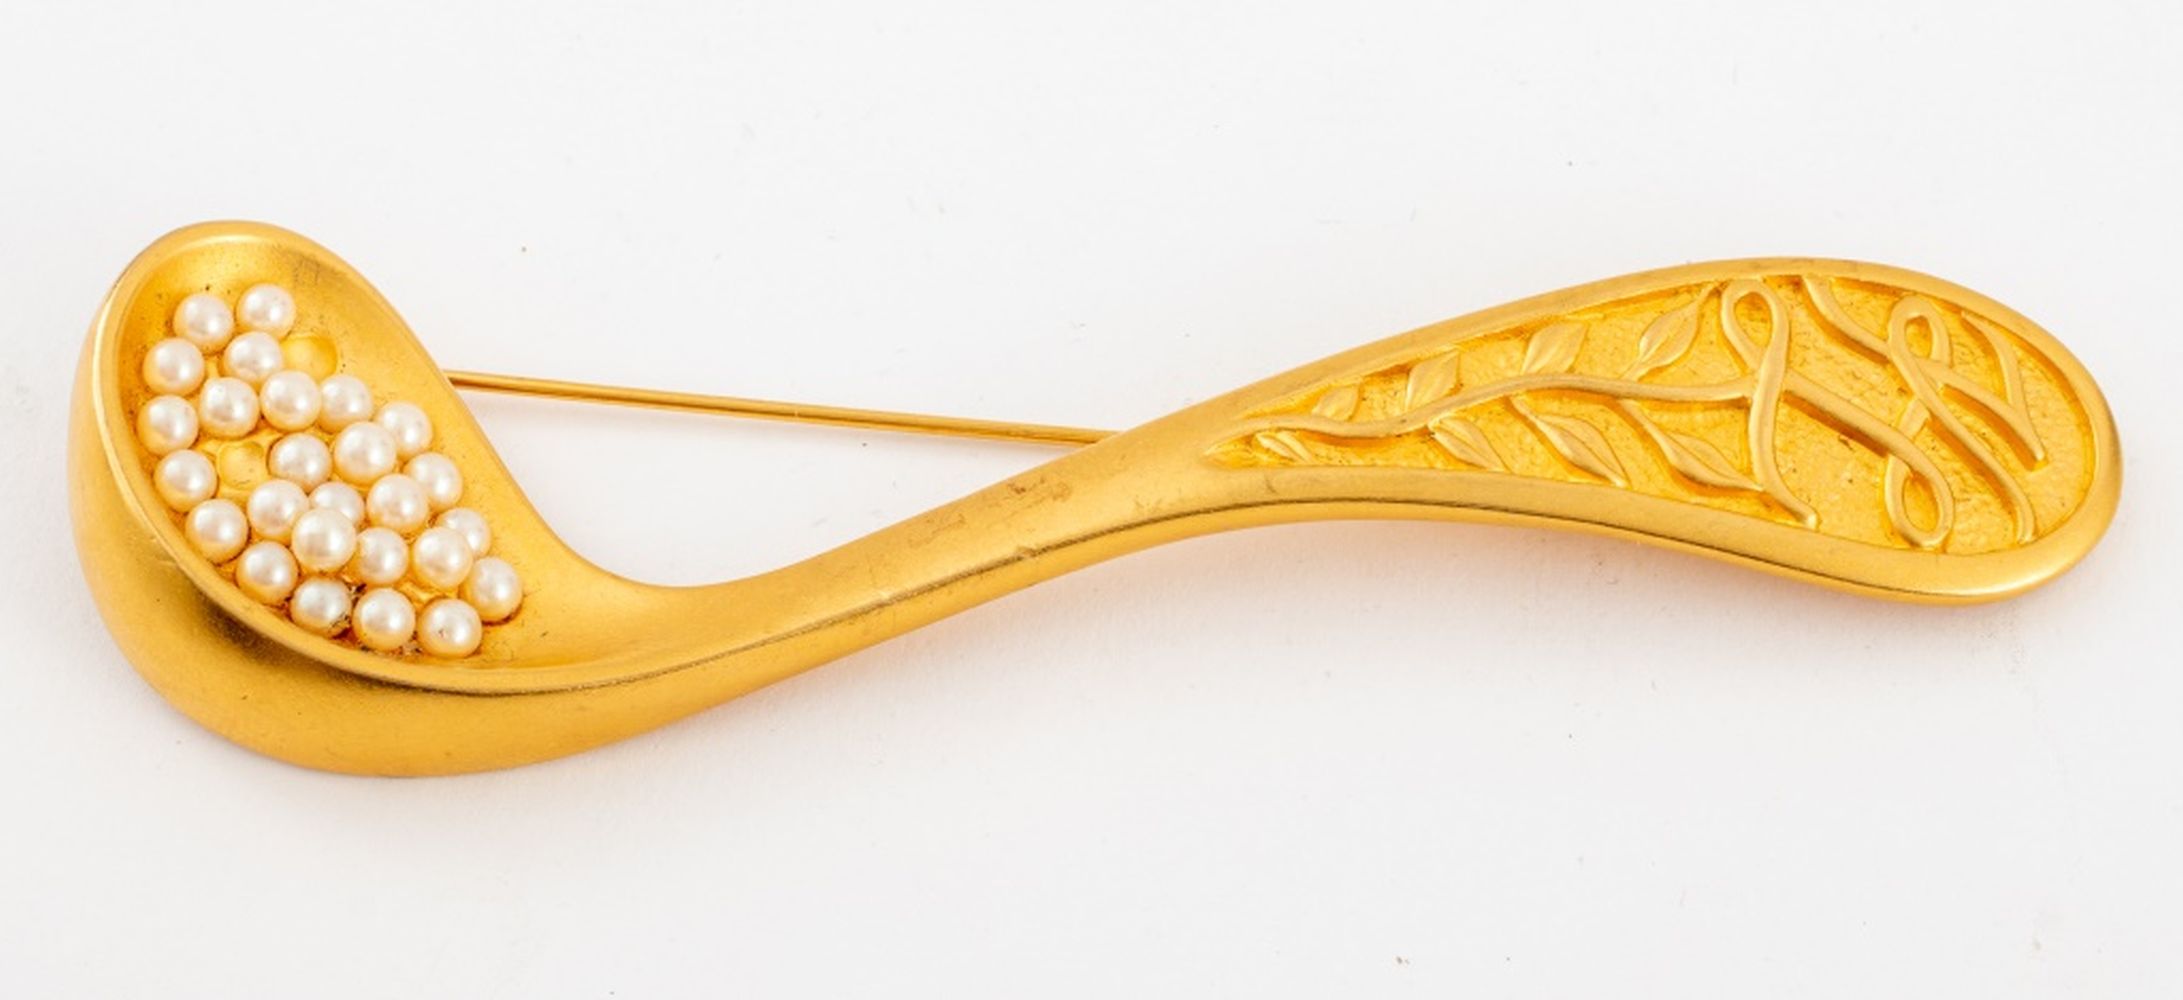 KARL LAGERFELD GOLD WASHED SPOON 2fc9ac